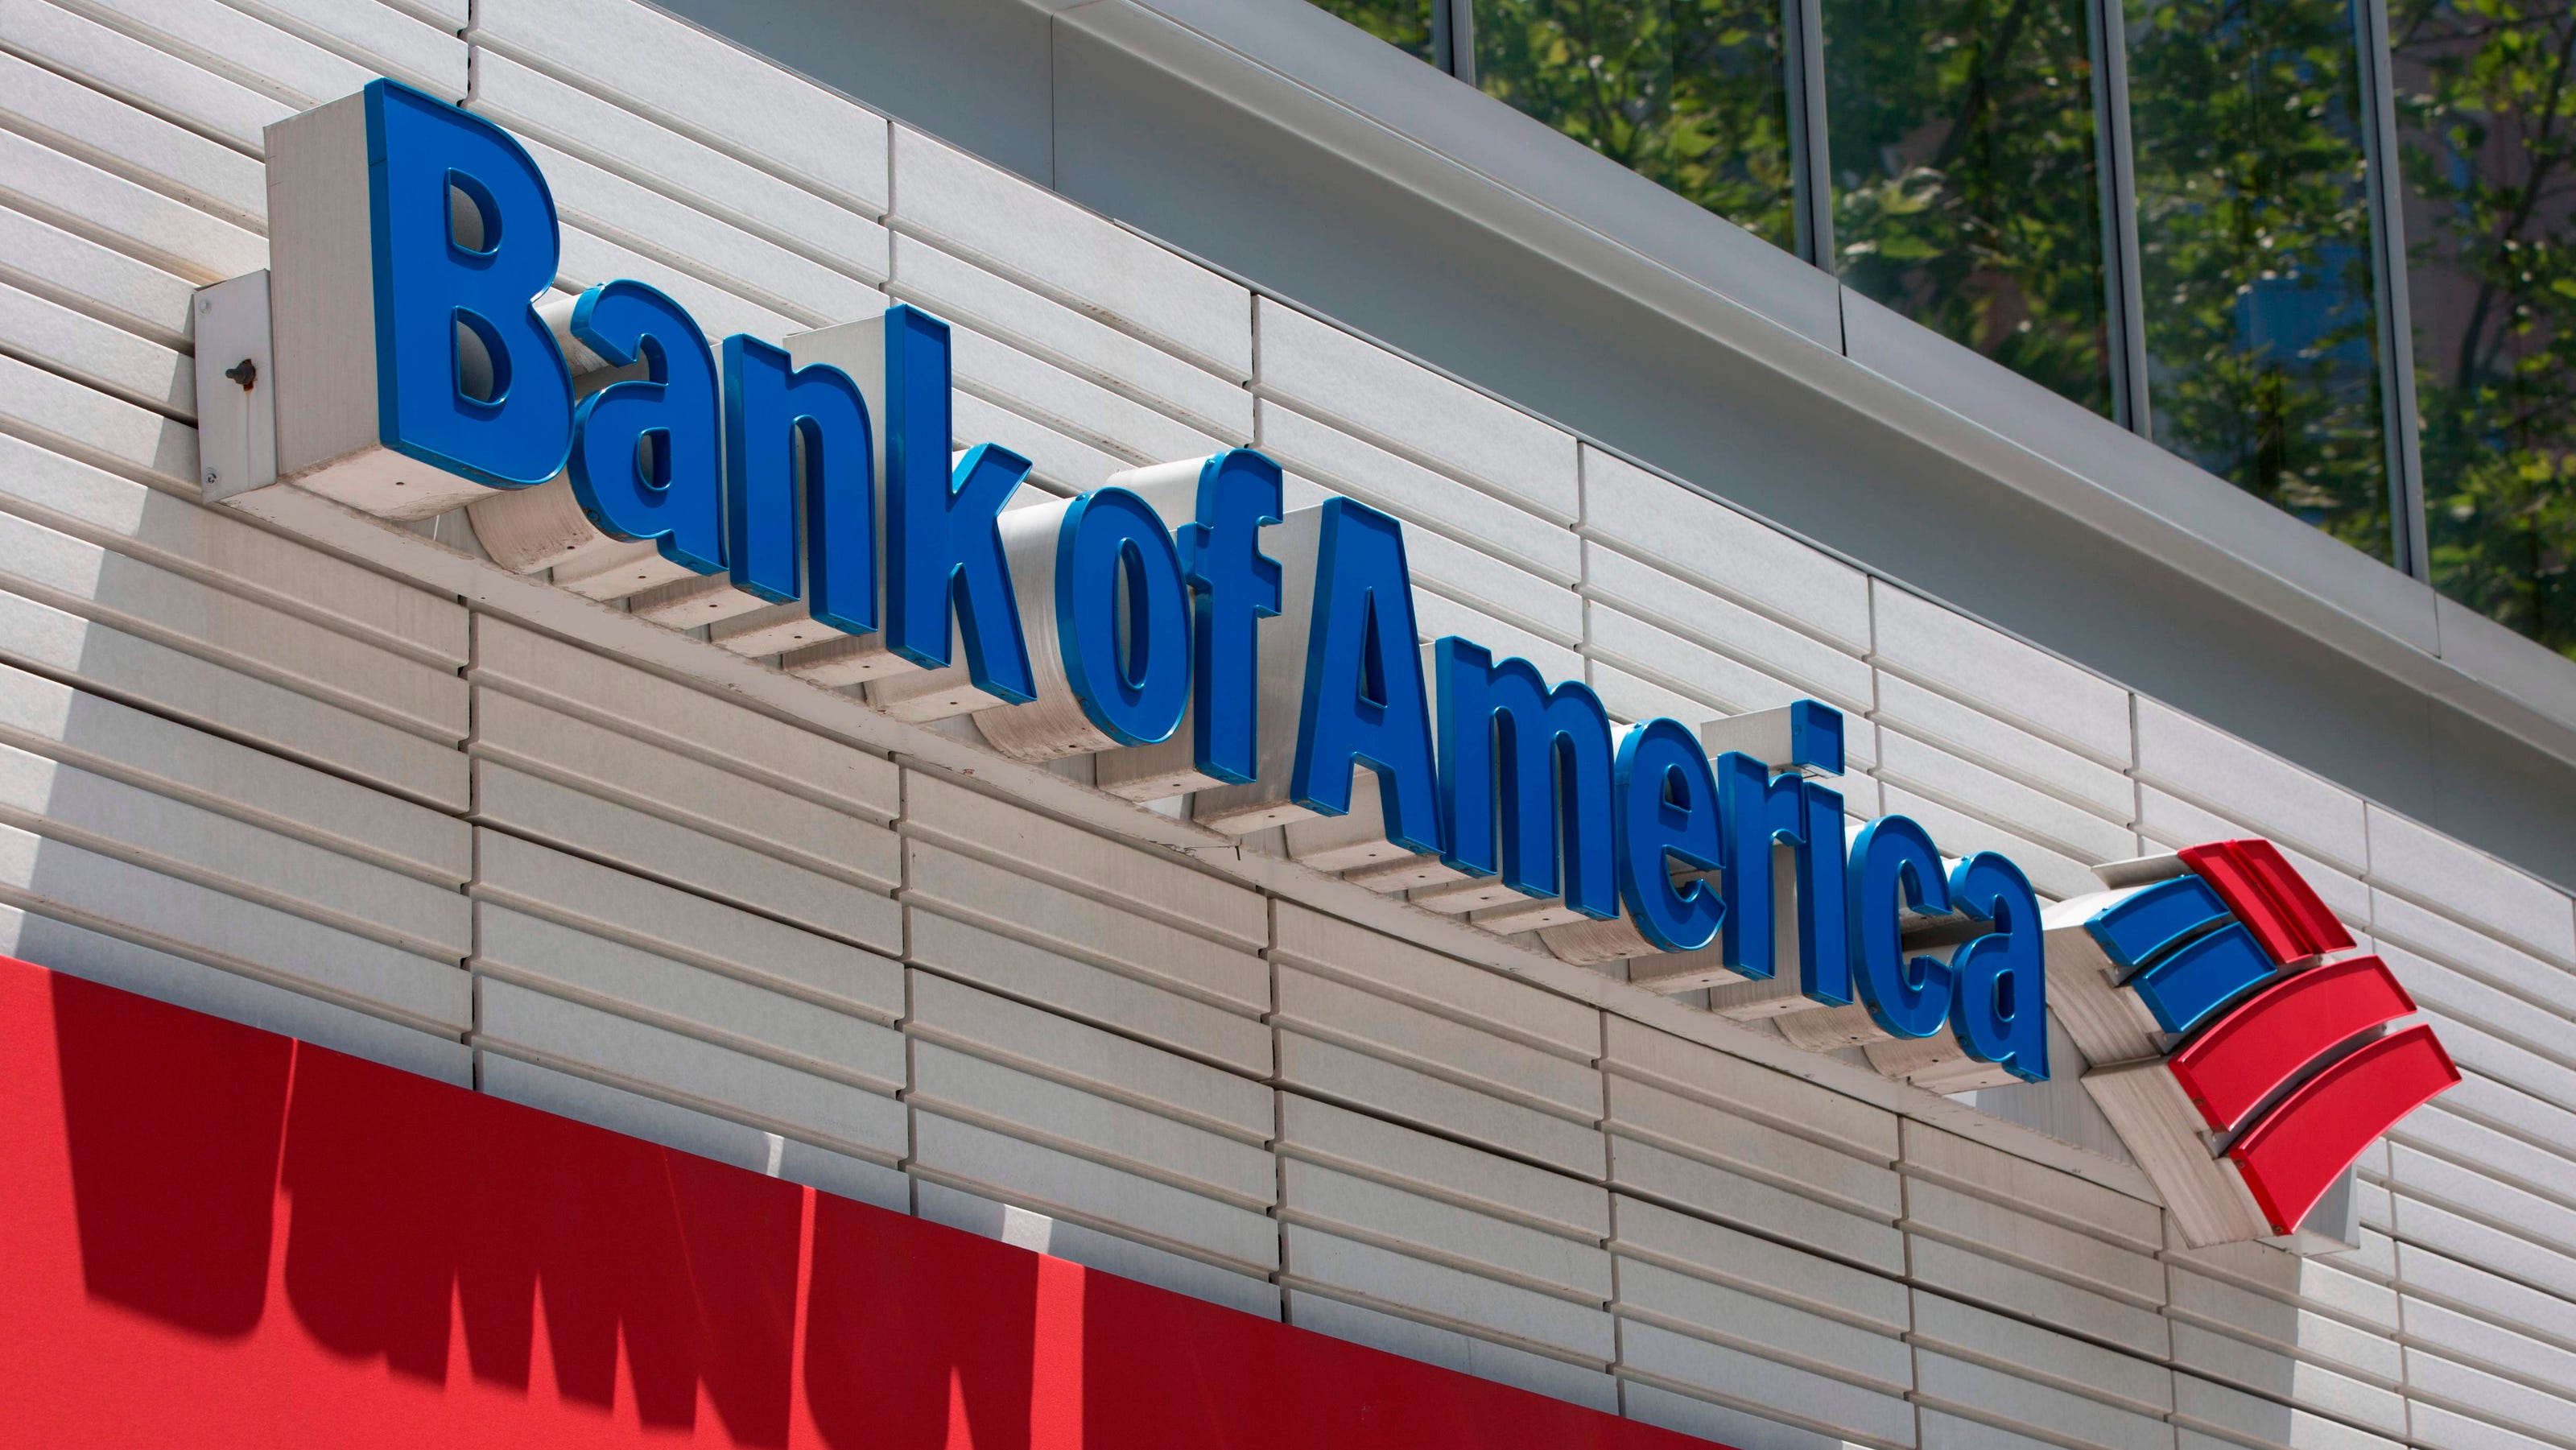 Bank of America locations in San Angelo to close in December 2019